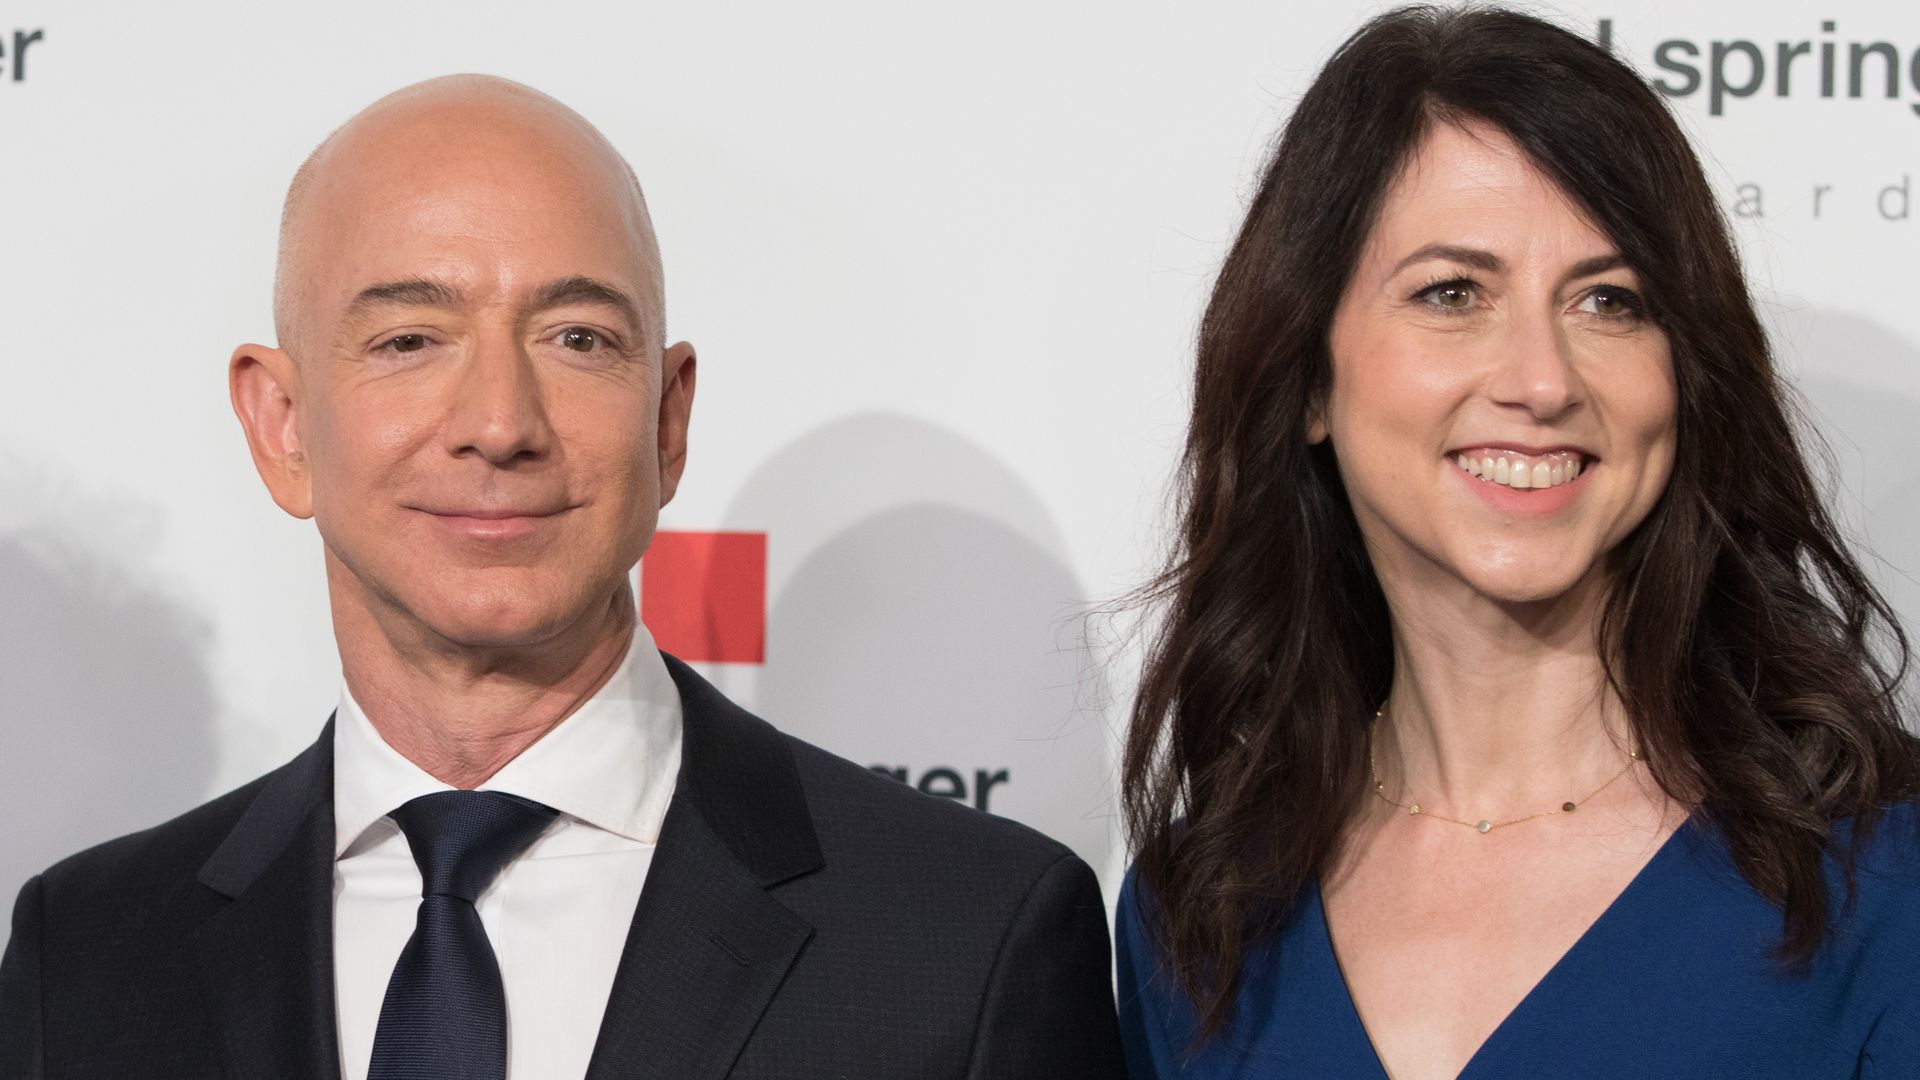 Amazon CEO Jeff Bezos and his wife MacKenzie Bezos poses as they arrive at the headquarters of publisher Axel-Springer where he will receive the Axel Springer Award 2018 on April 24, 2018 in Berlin.